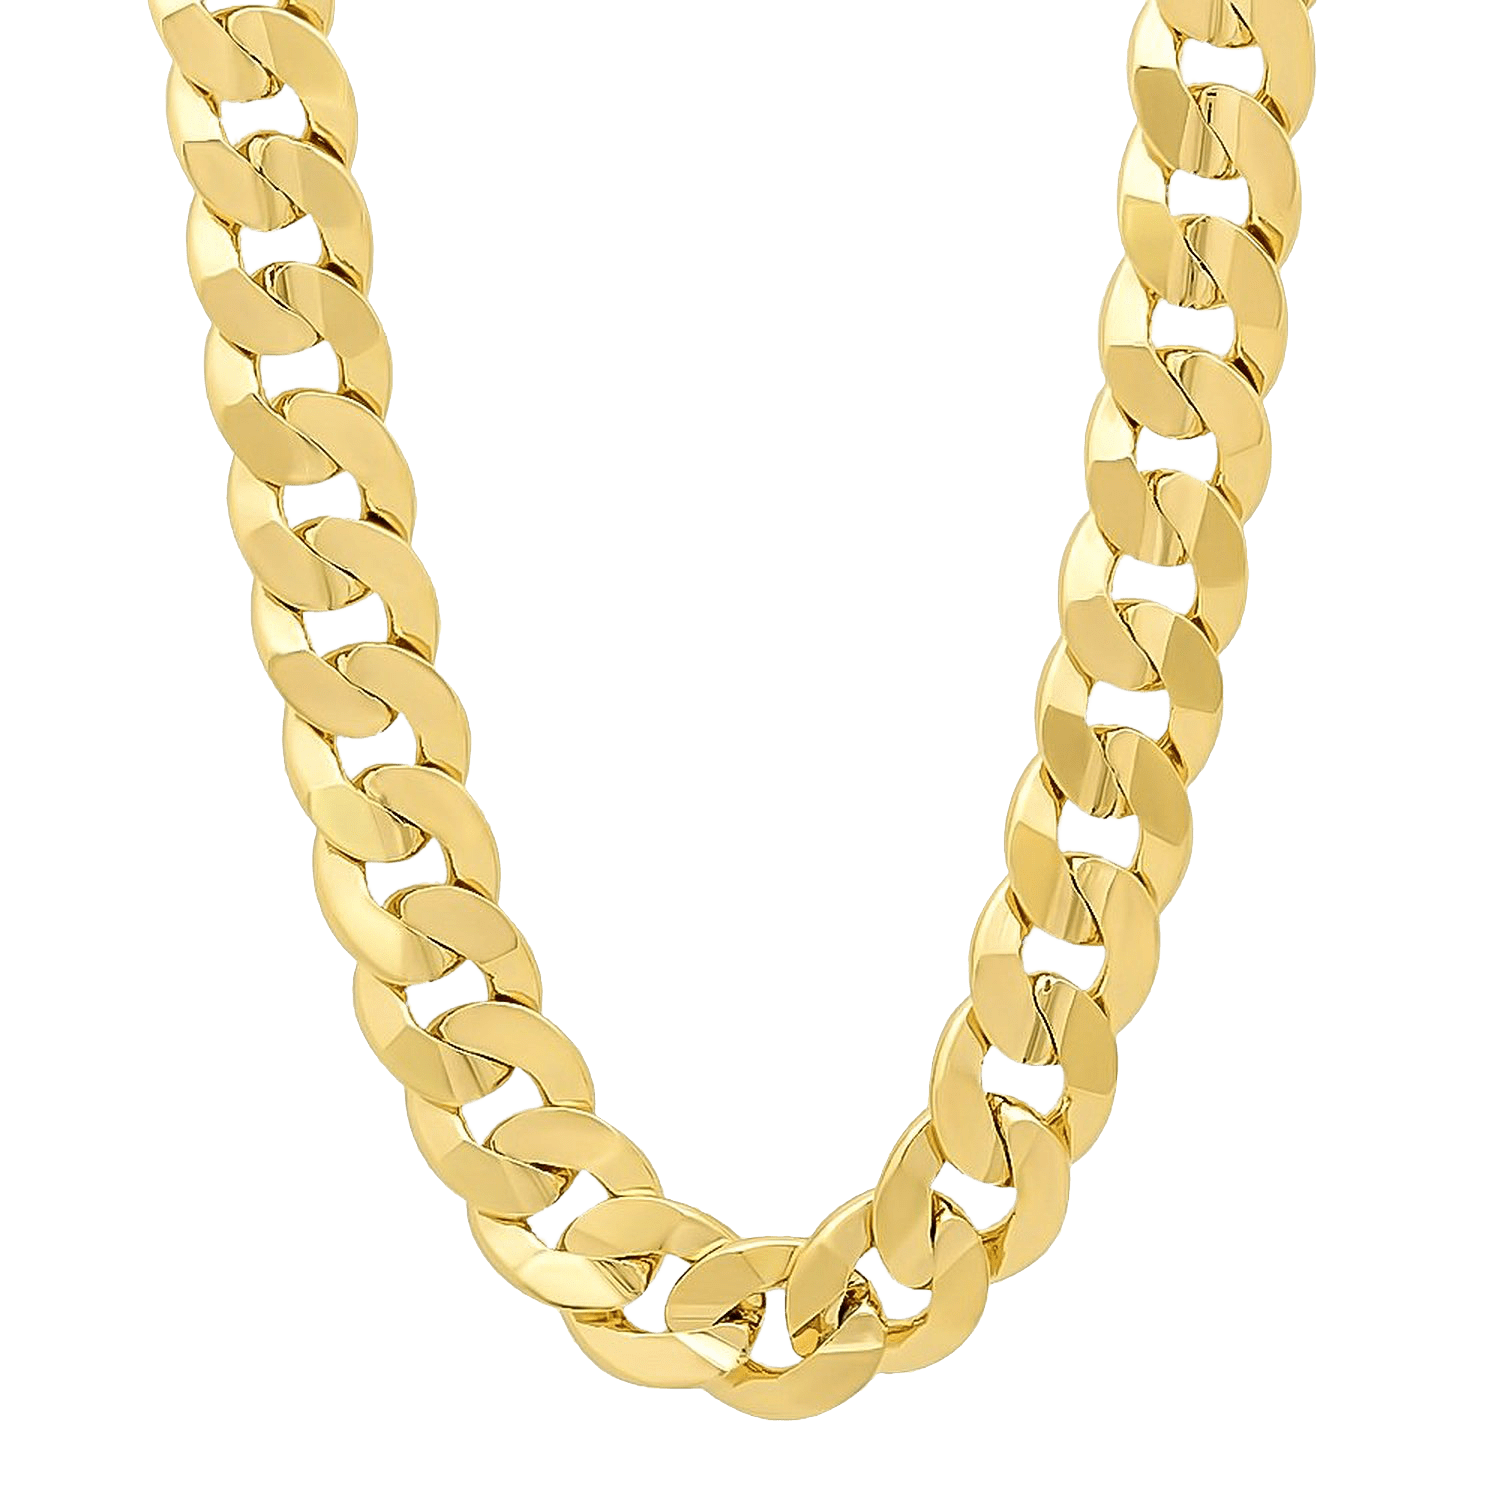 Gents Golden Chain PNG Free Download